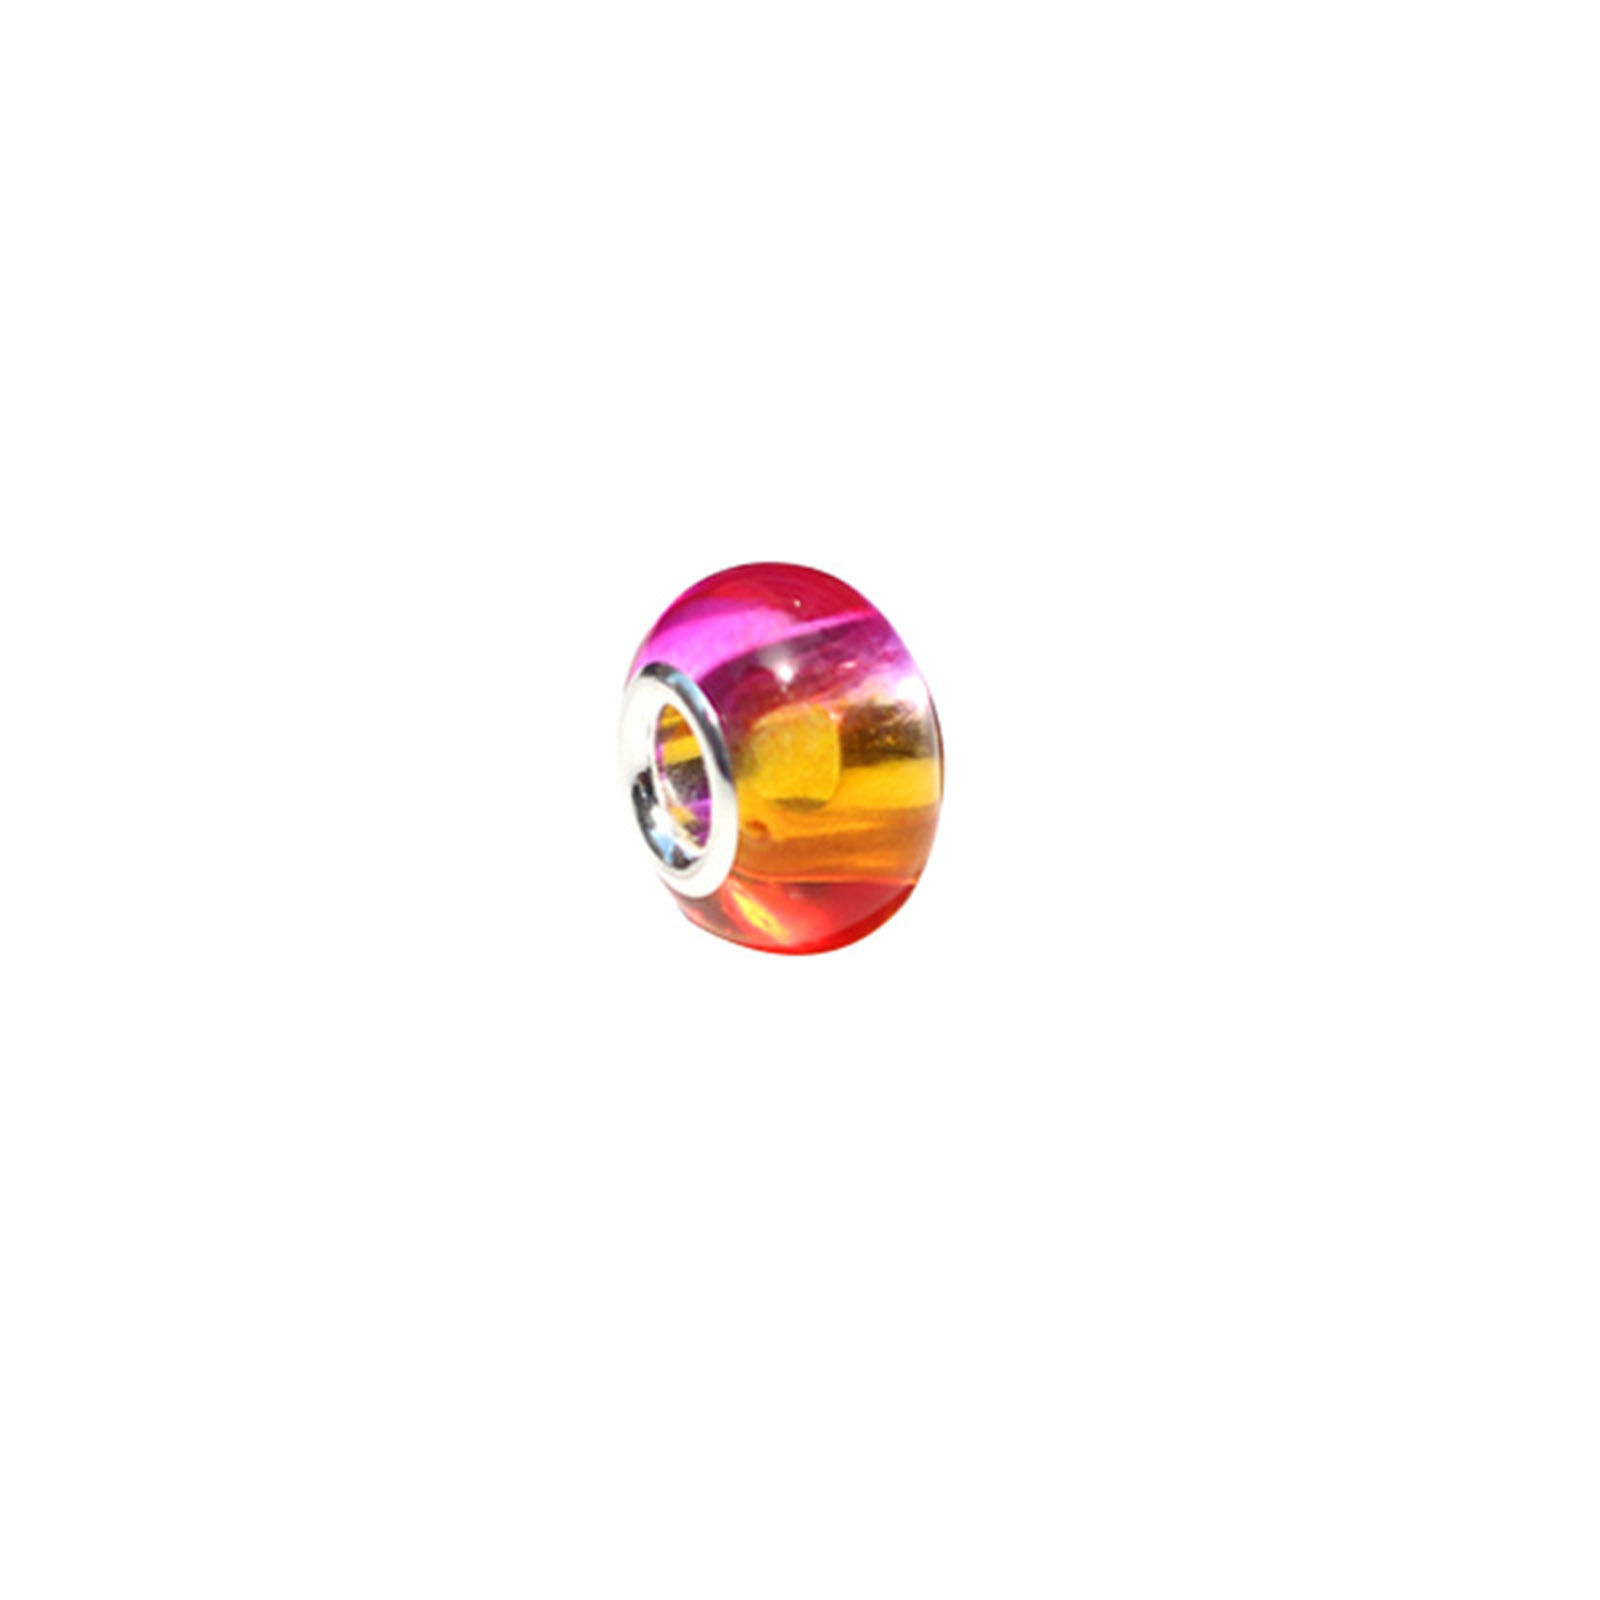 Picture of Resin European Style Large Hole Charm Beads Fushia & Orange Round Gradient Color 14mm x 9mm, Hole: Approx 5mm, 20 PCs